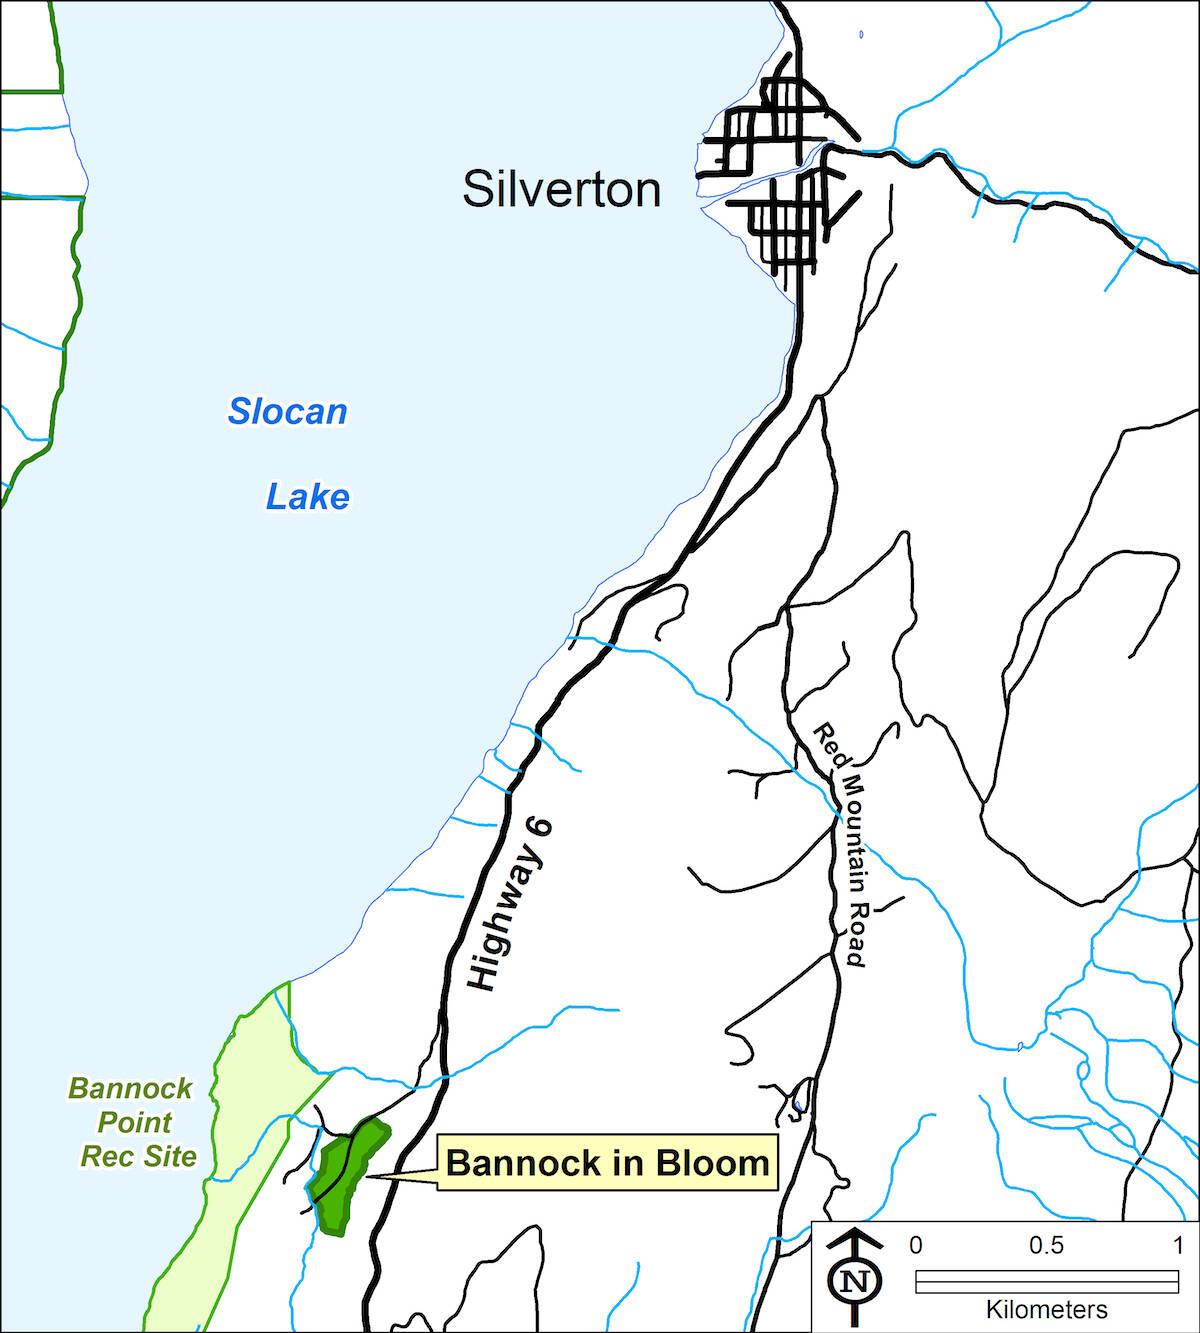 The location of Bannock in Bloom, south of Silverton, B.C. Map: Slocan Integrated Forestry Cooperative